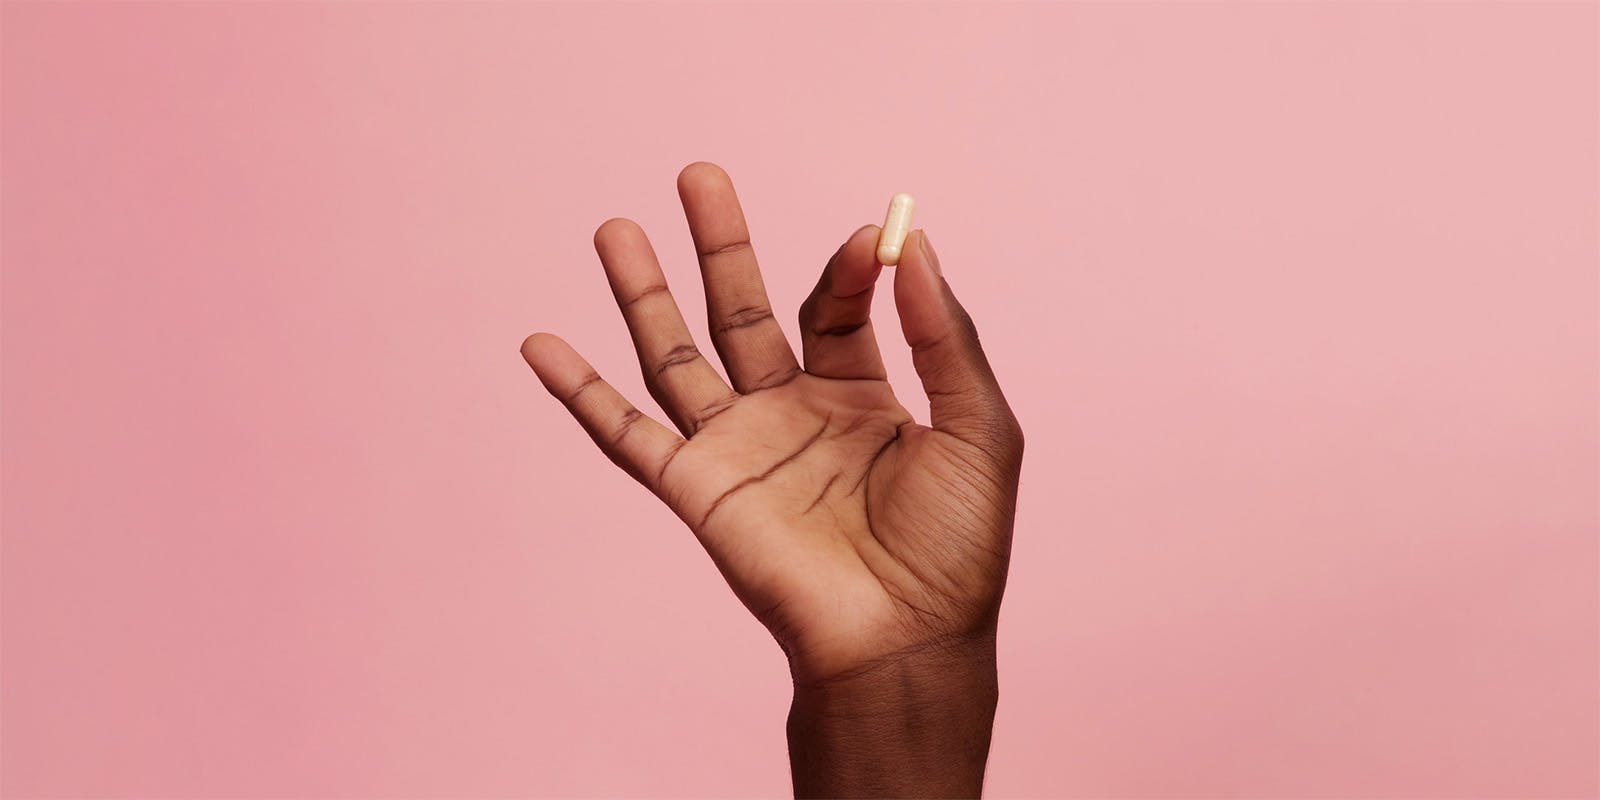 A dark female hand holding up a pill pinched between index finger and thumb